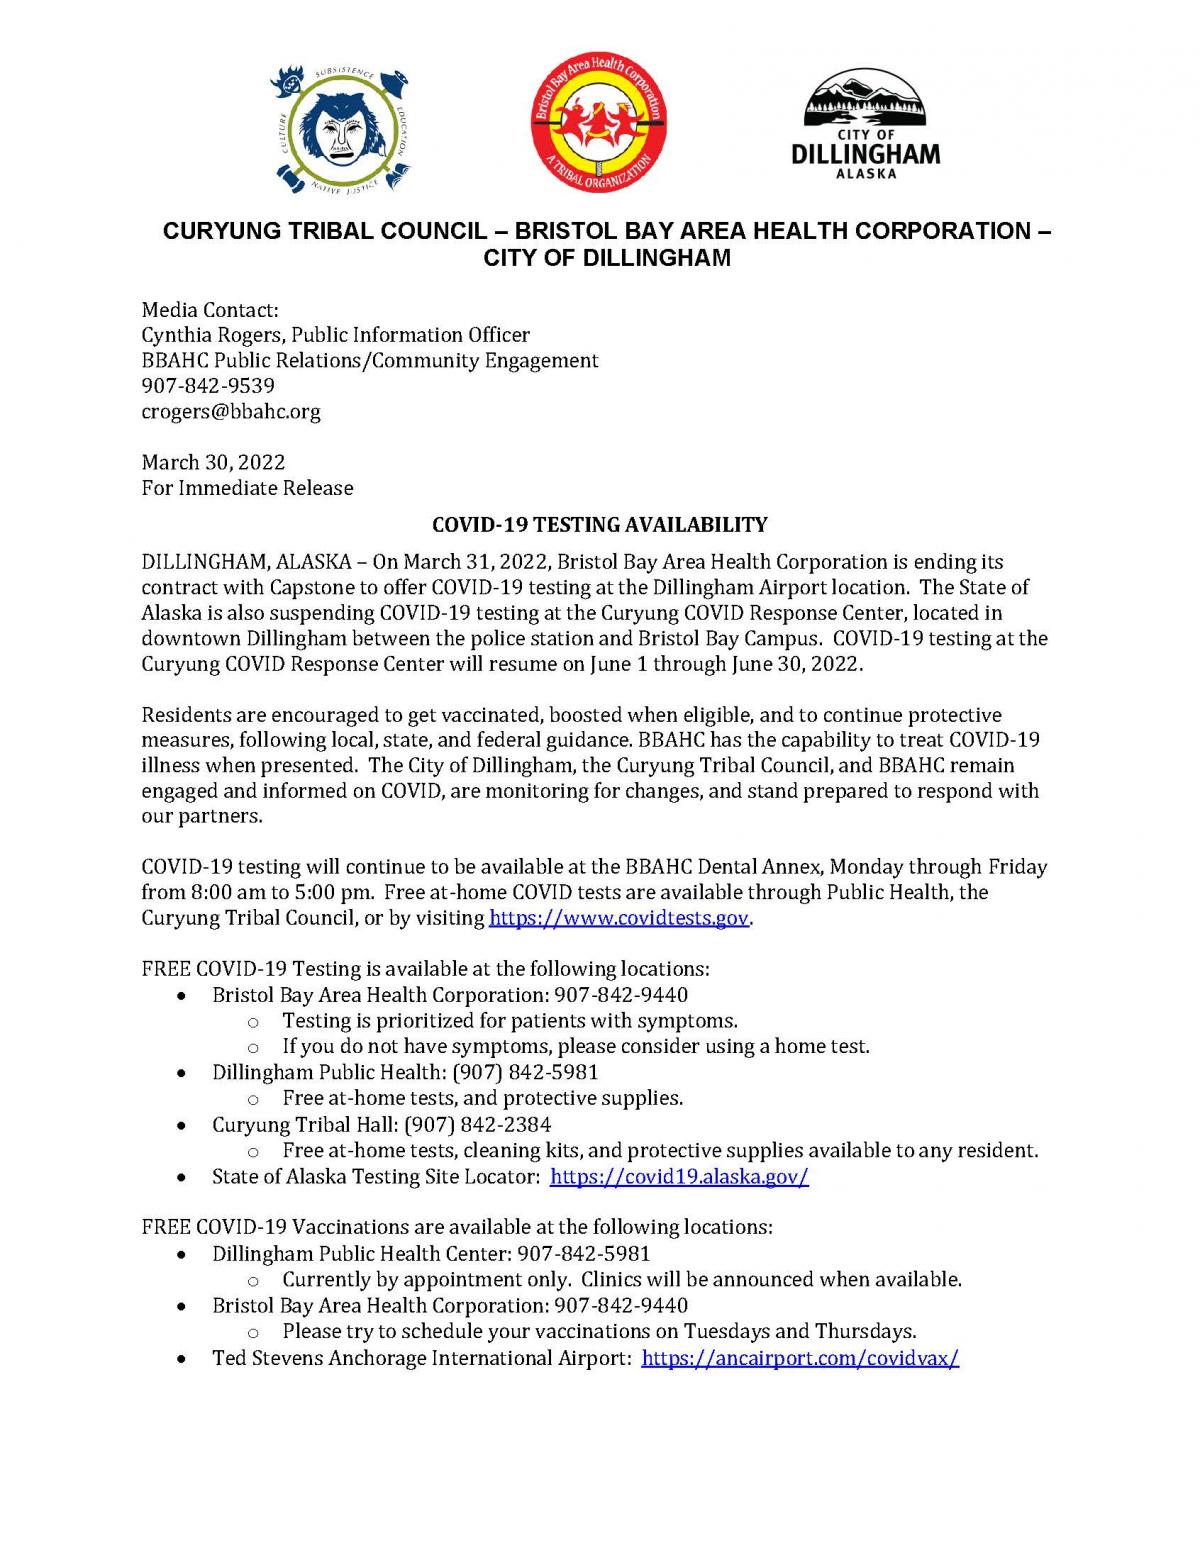 03.30.2022 Curyung Tribal Council, Bristol Bay Area Health Corporation, and the City of Dillingham Joint Press Release, Page 1